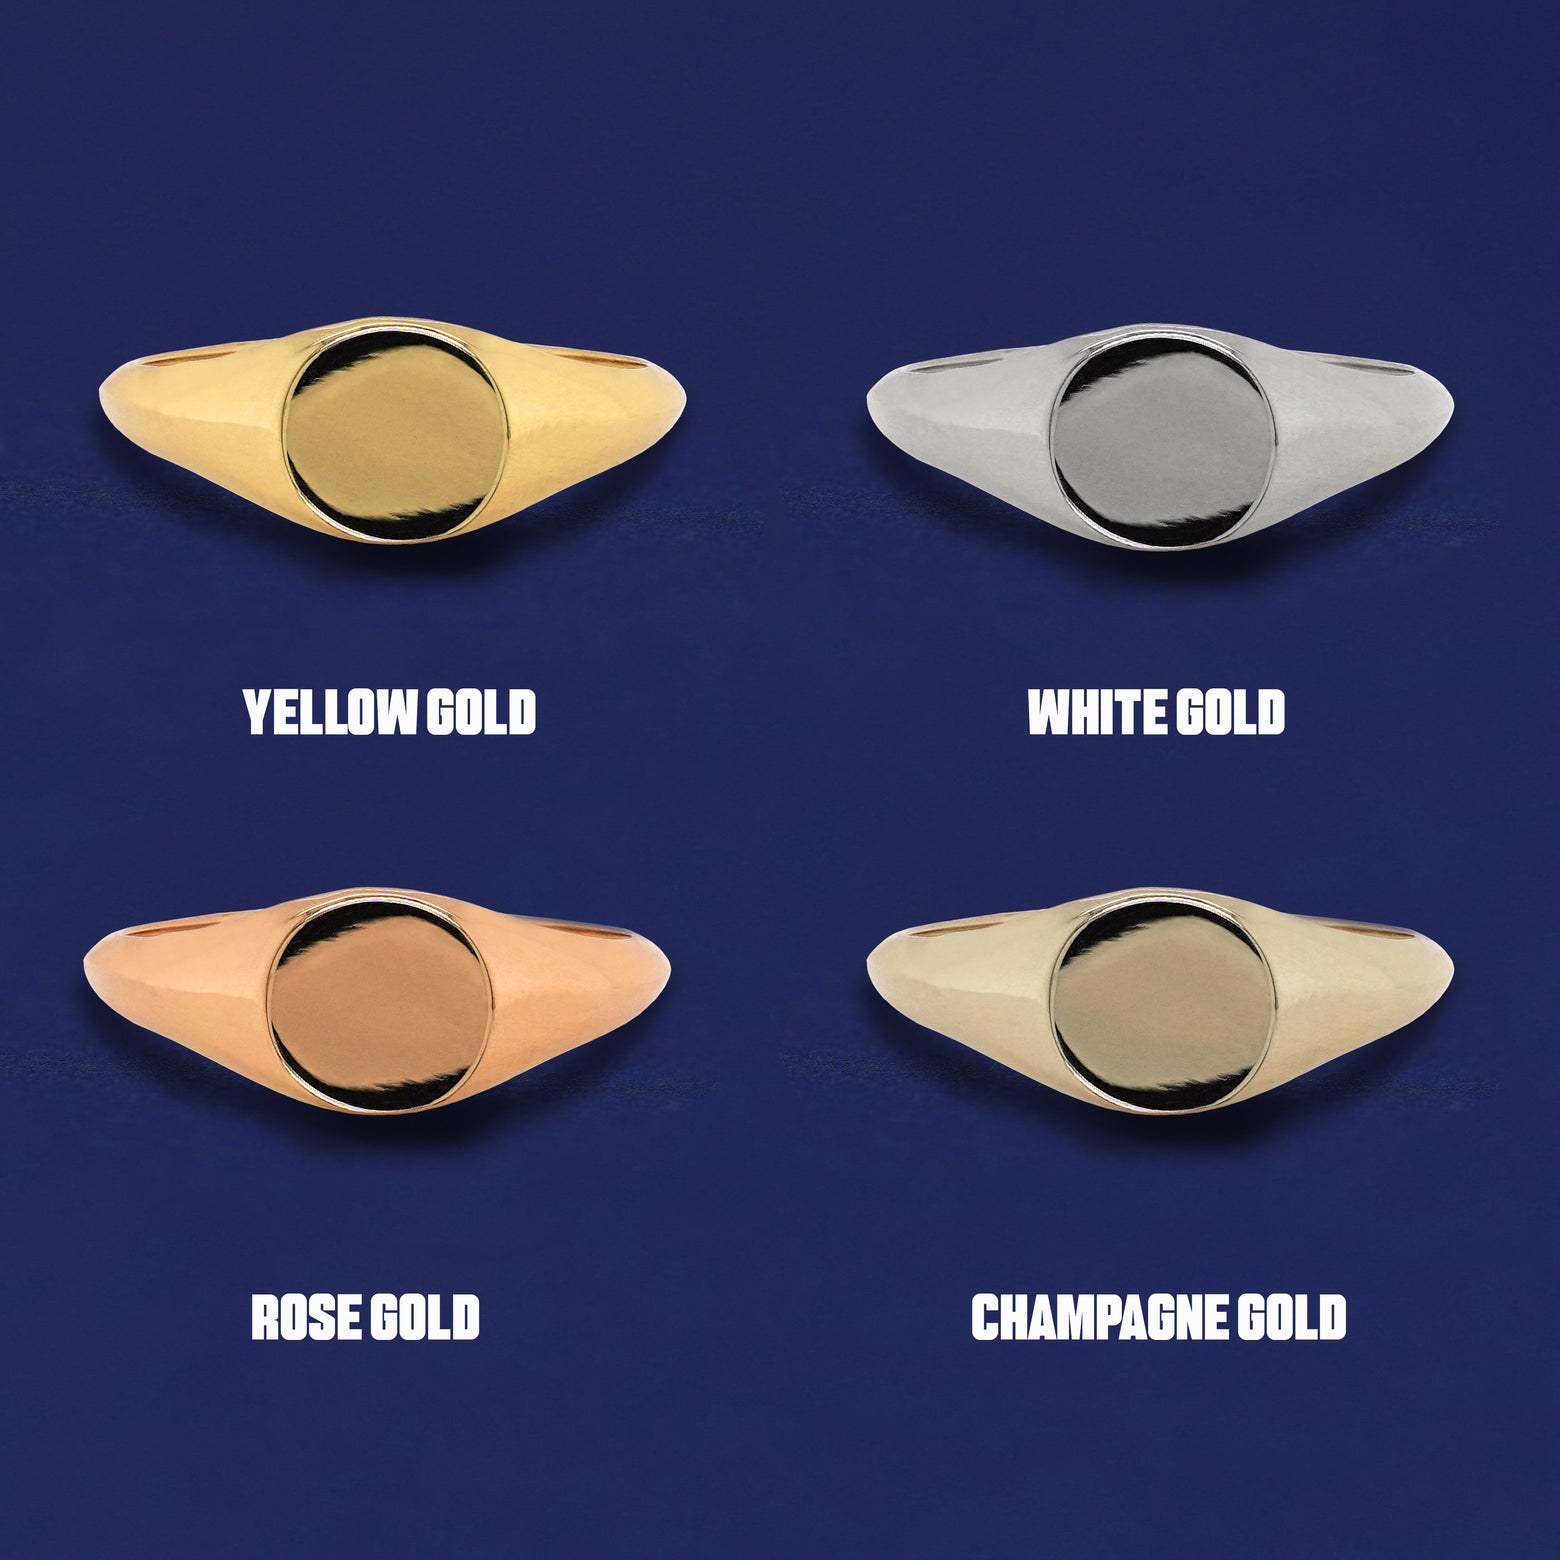 Four versions of the Signet Ring shown in options of yellow, white, rose and champagne gold